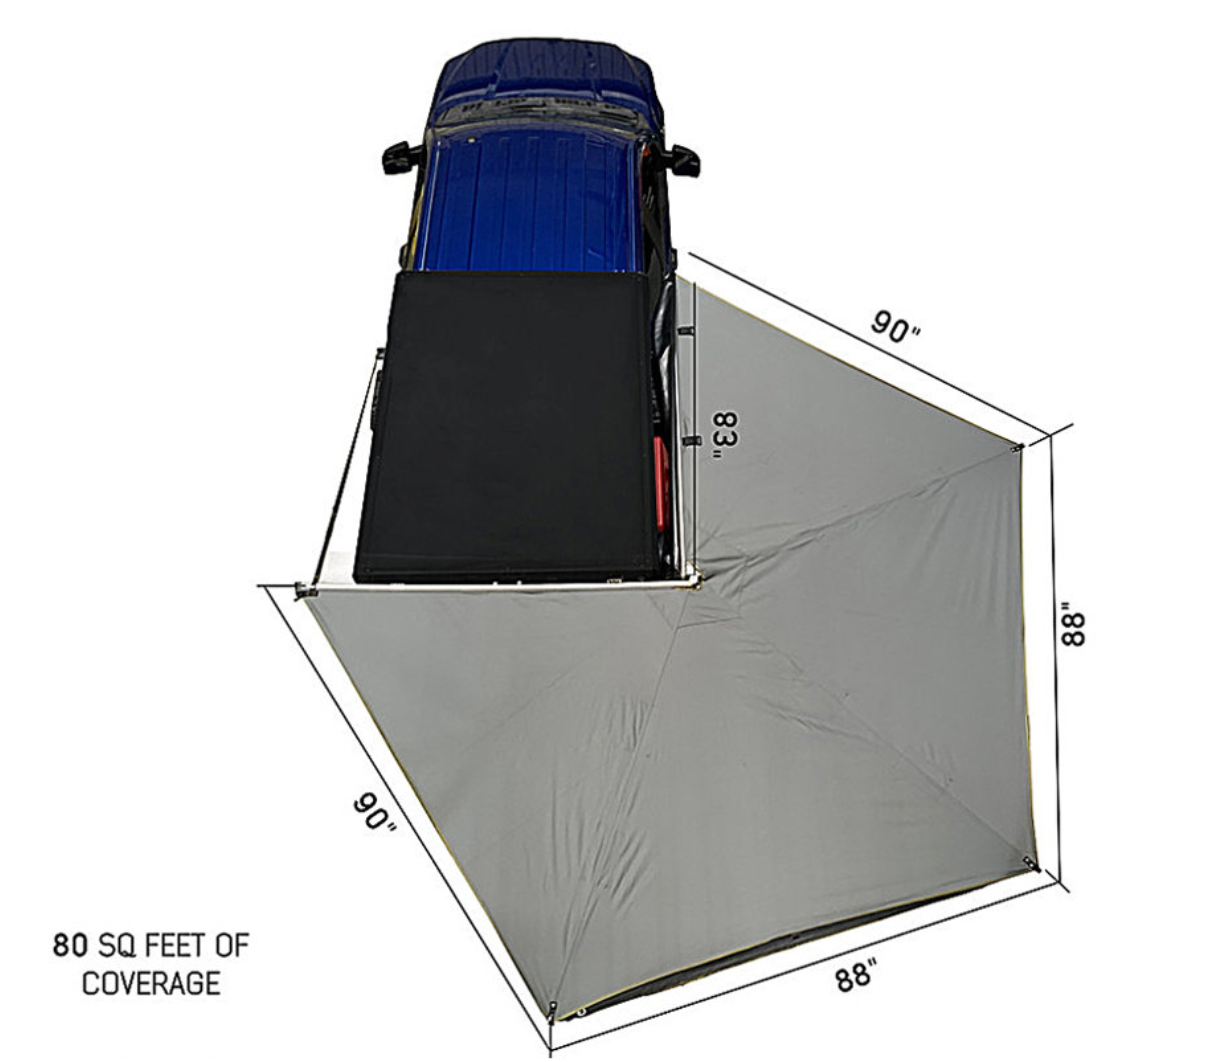 Overland Vehicle Systems Nomadic 270 LT Awning with Black Storage Cover